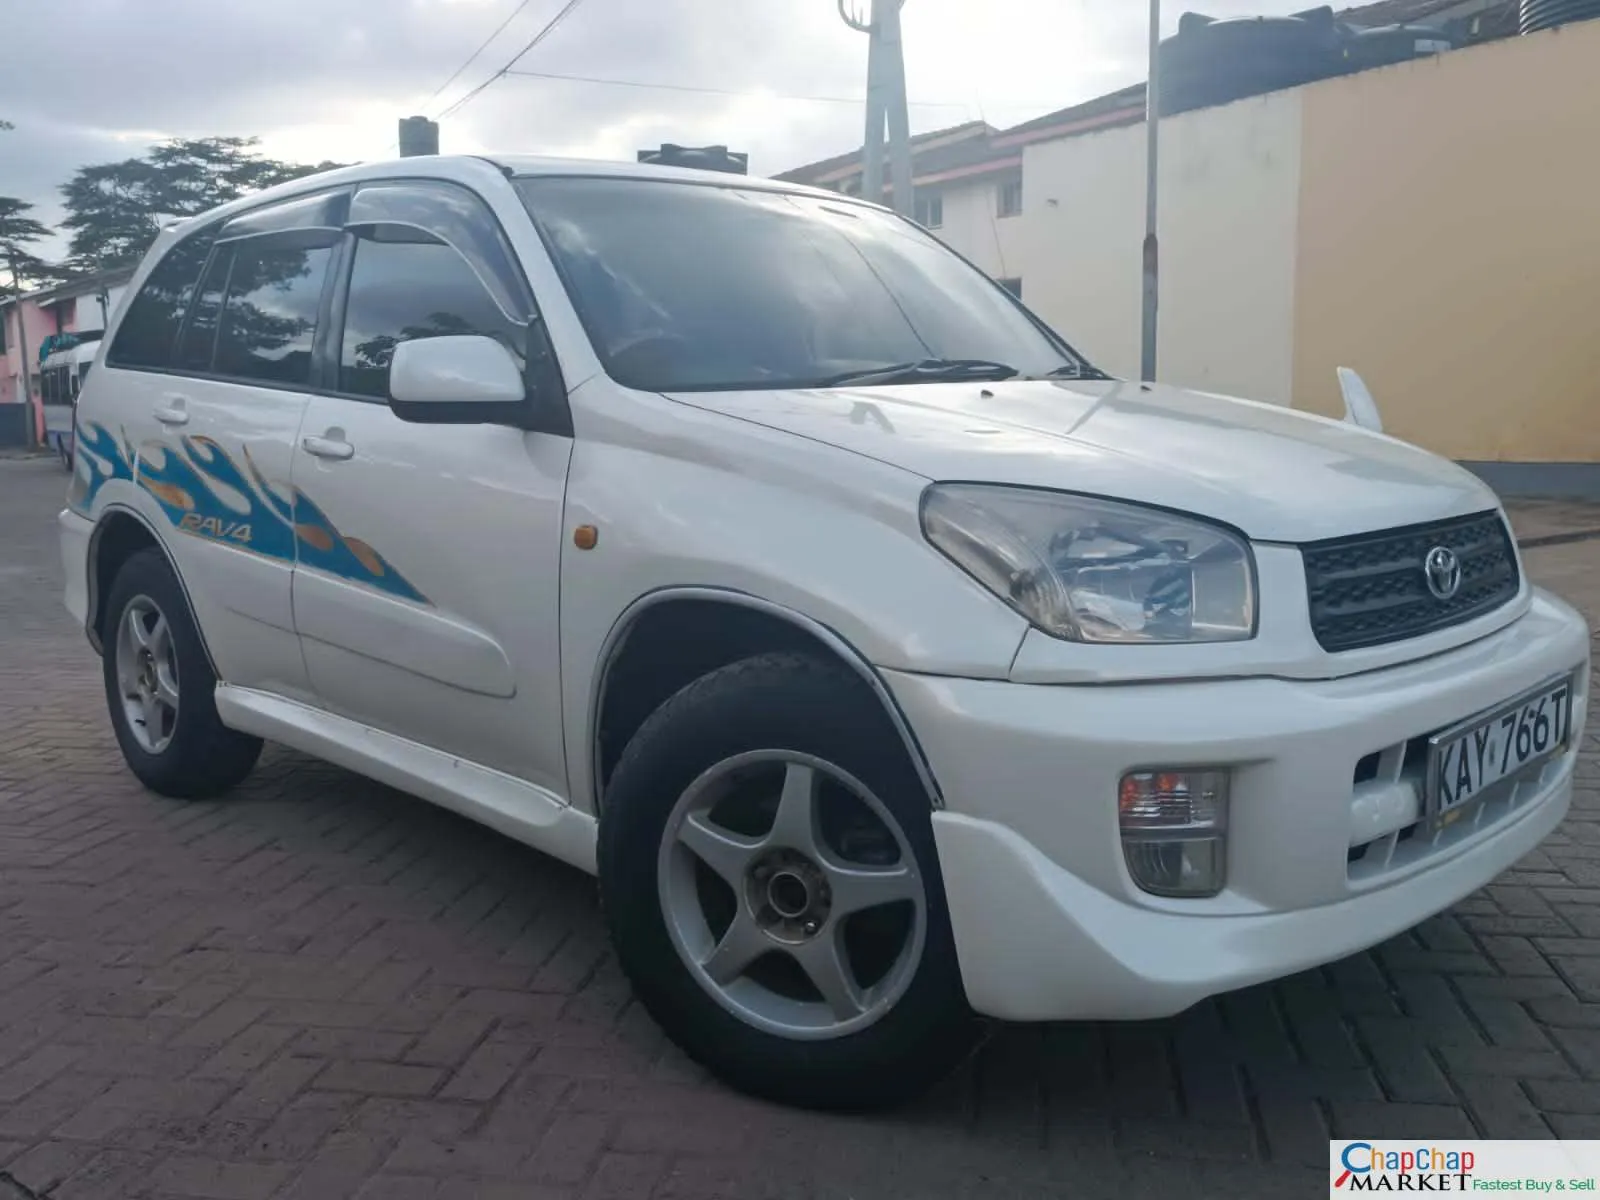 Cars Cars For Sale Language-Toyota RAV4 1800cc QUICKEST SALE You Pay 30% Deposit Trade in OK Wow! 9